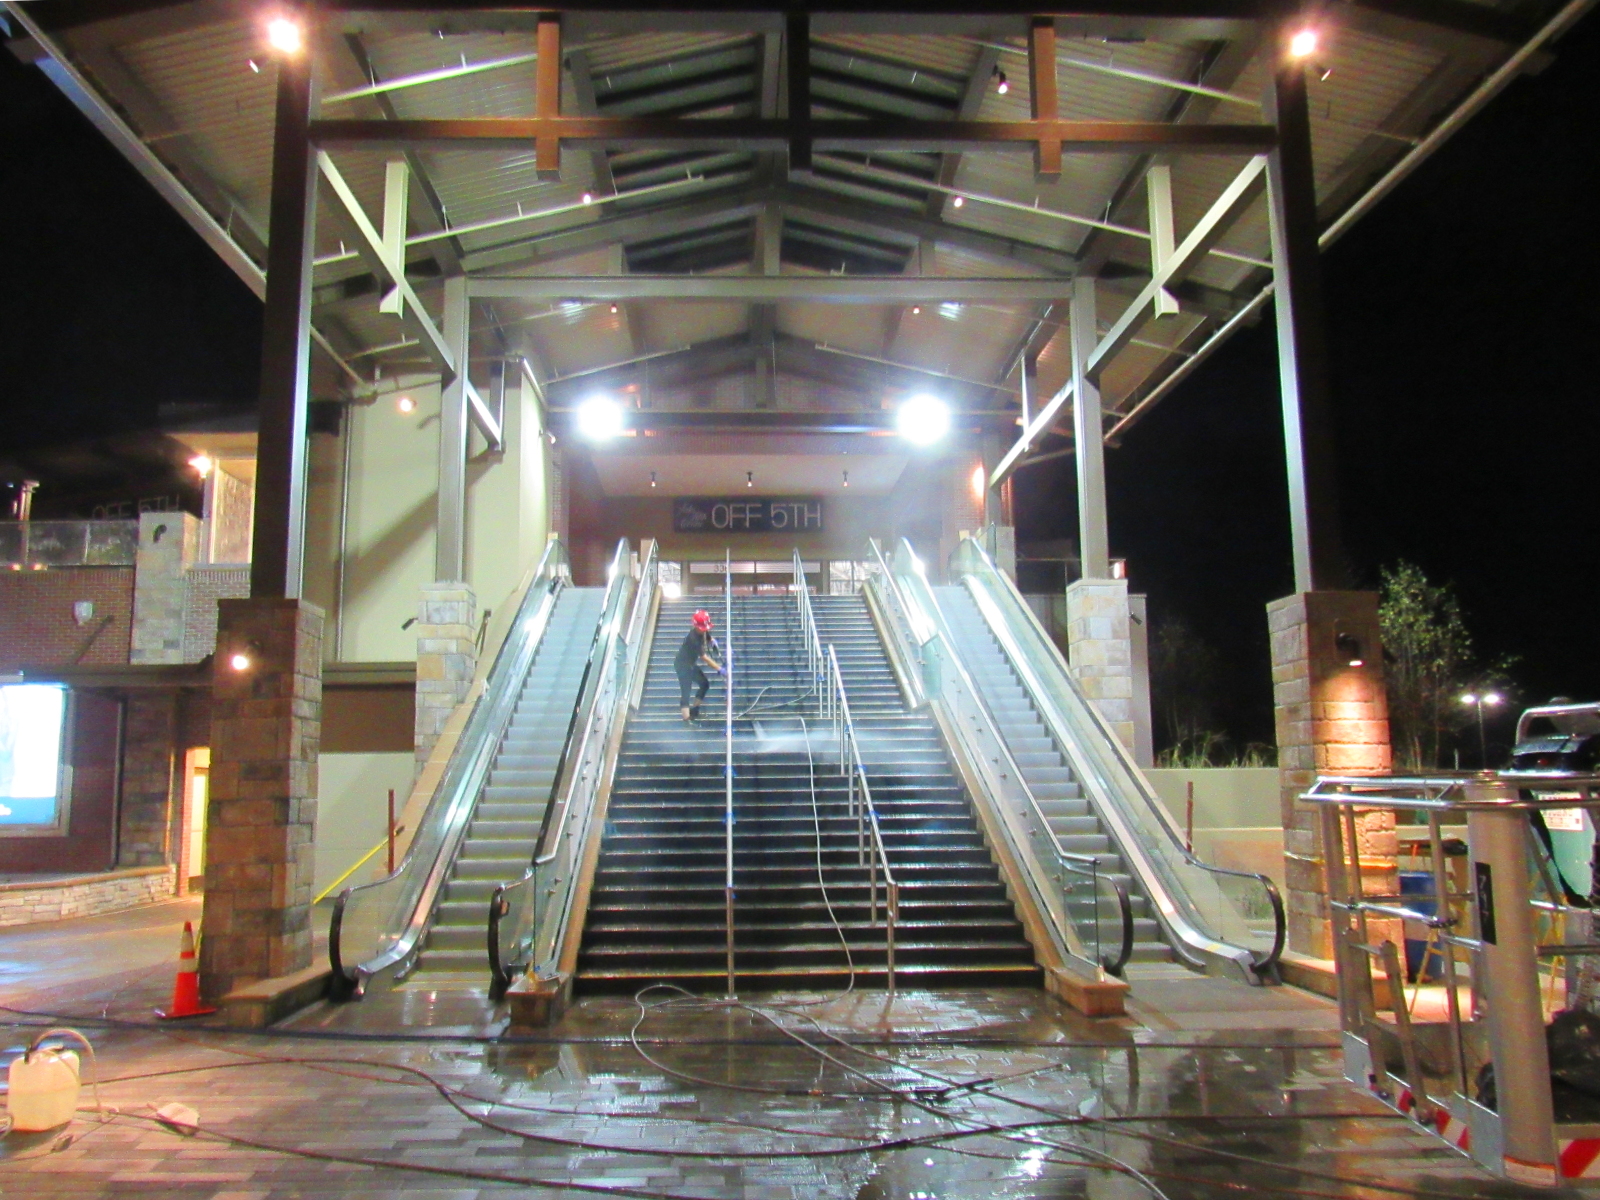 Expert pressure washing shopping center with stairs at night